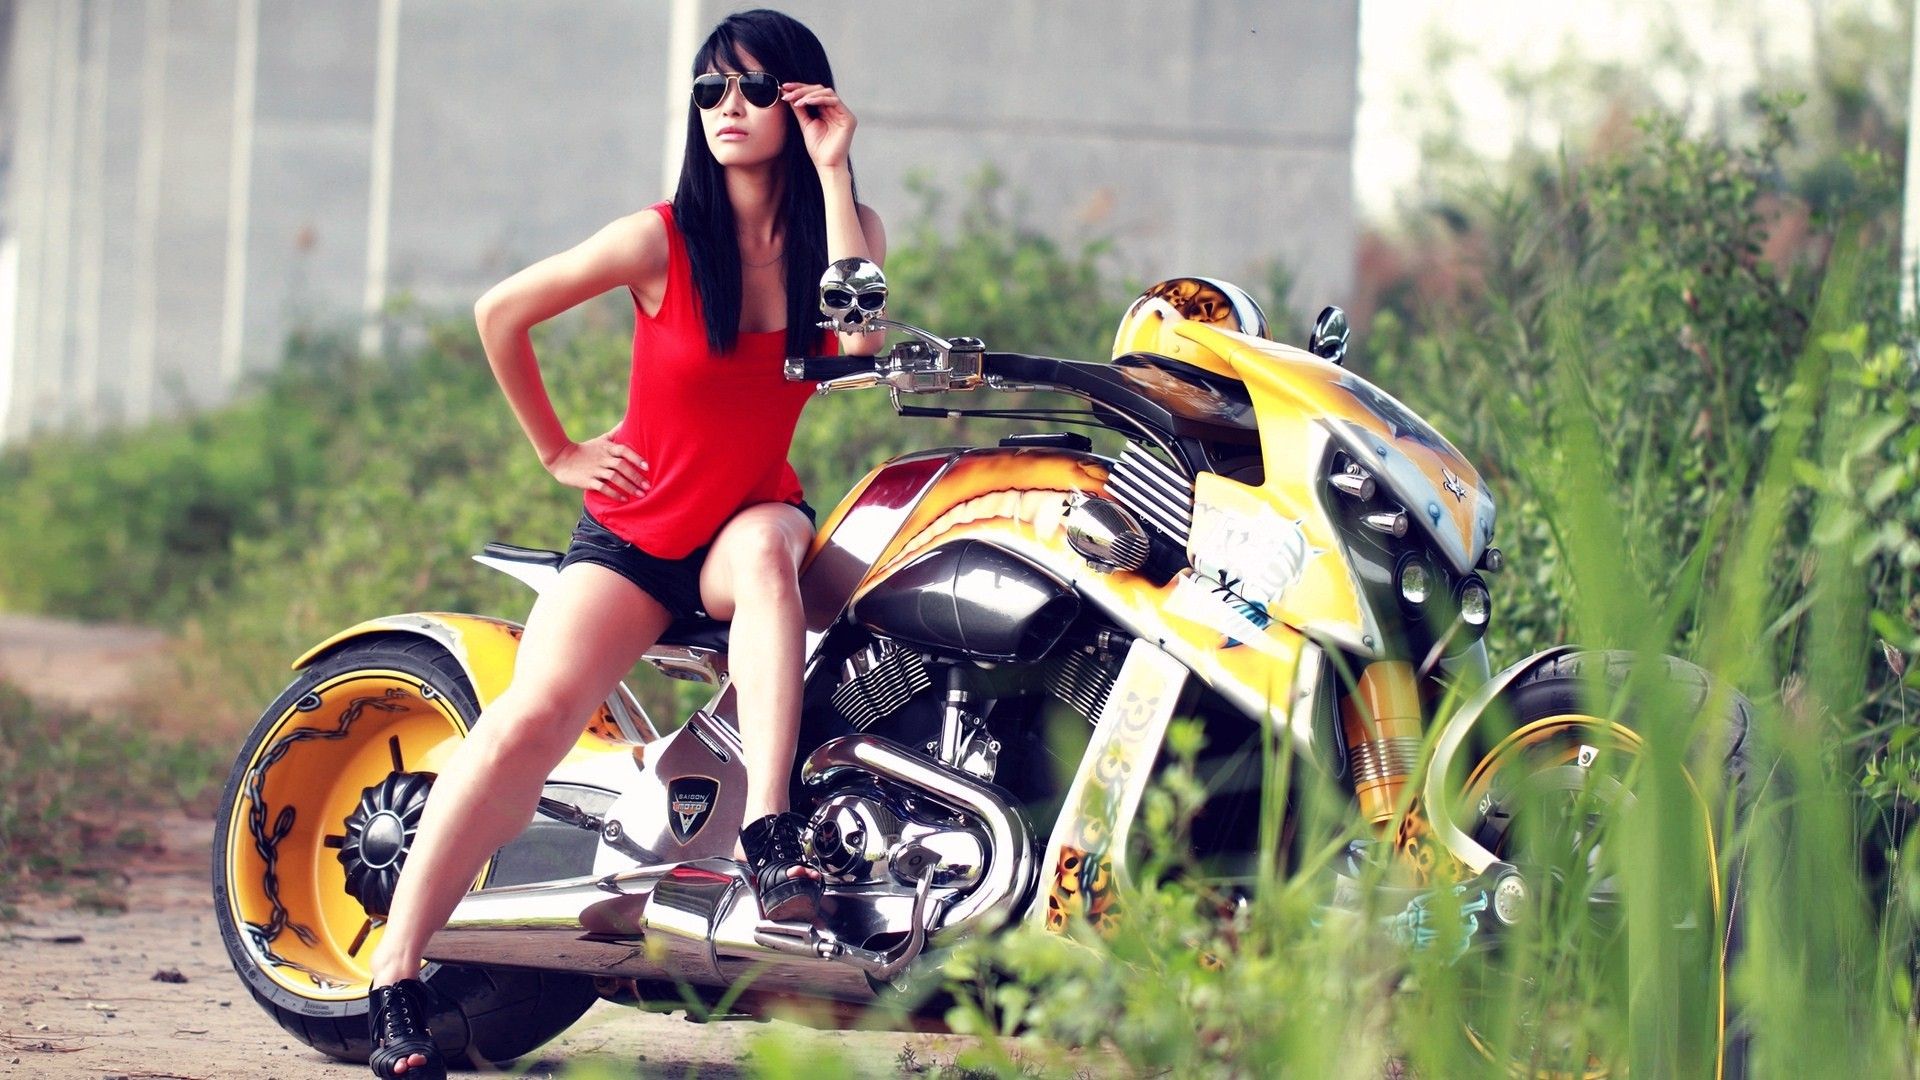 Ktm Bike With Girl Images Hd - HD Wallpaper 